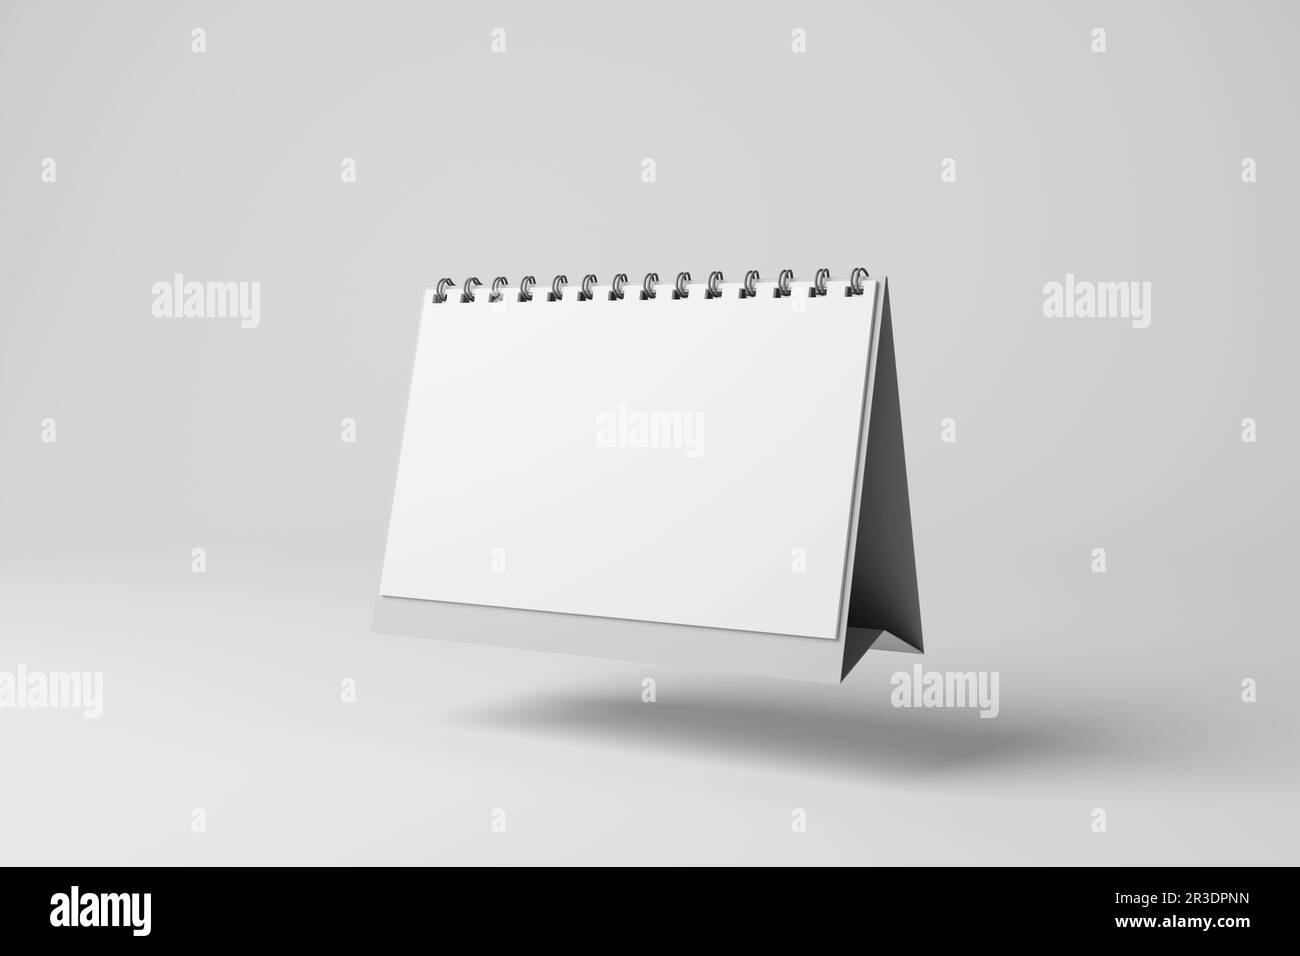 White monthly desktop calendar floating in mid air casting shadow on white background in grayscale monochrome. Business schedules and appointments Stock Photo